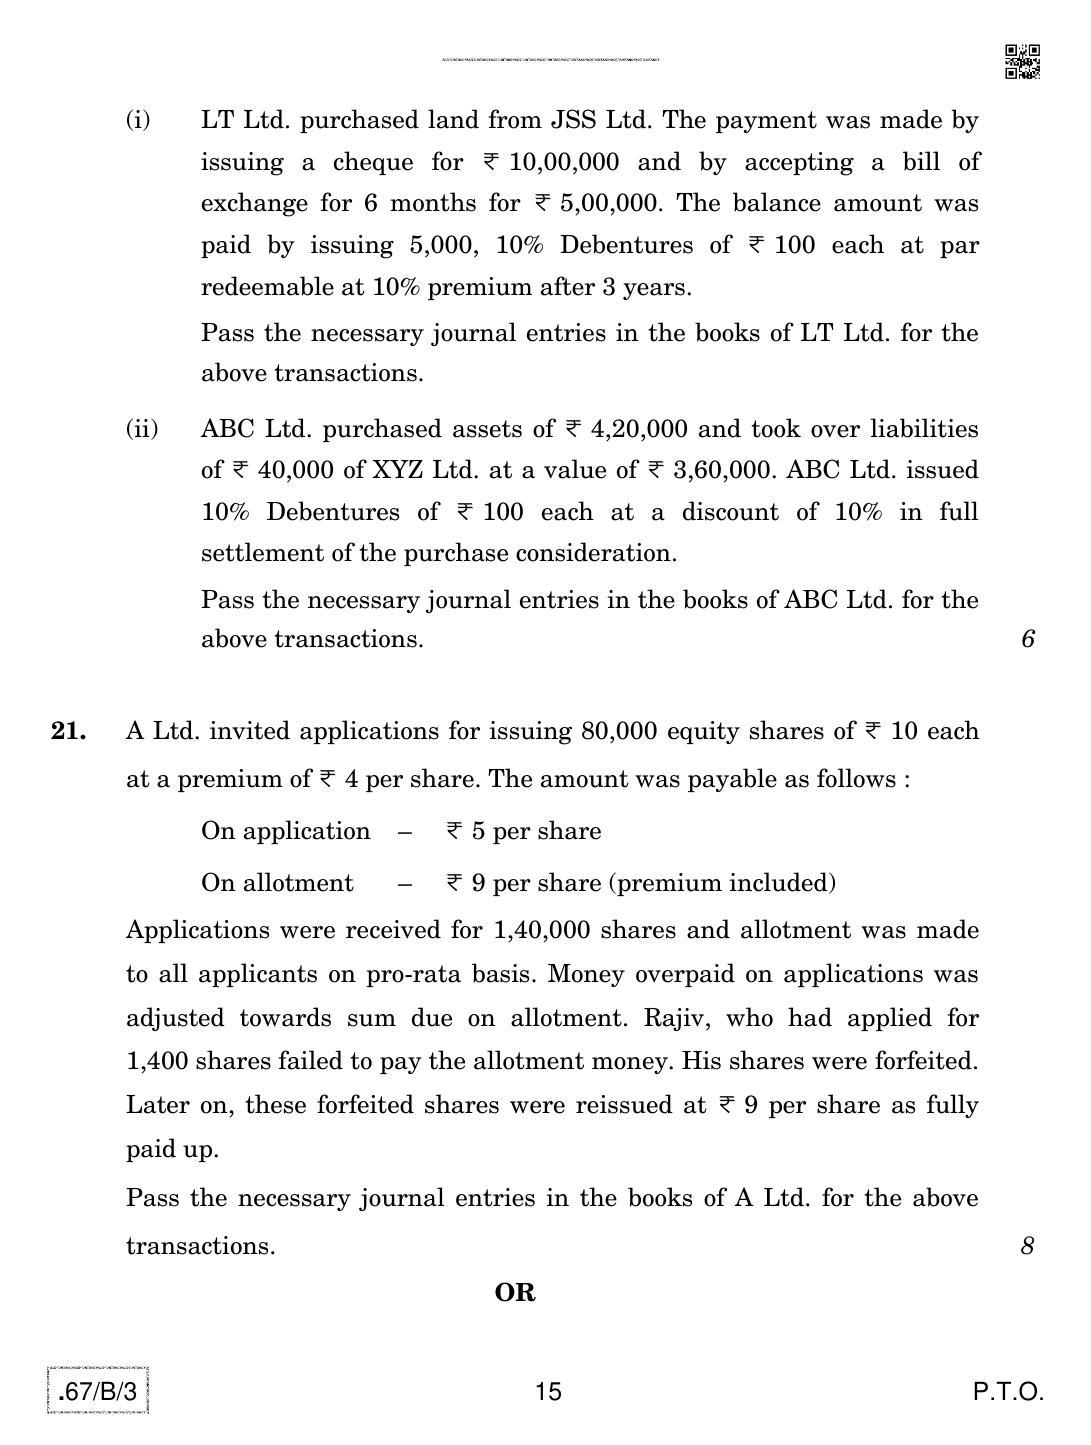 CBSE Class 12 67-C-3 - Accountancy 2020 Compartment Question Paper - Page 15